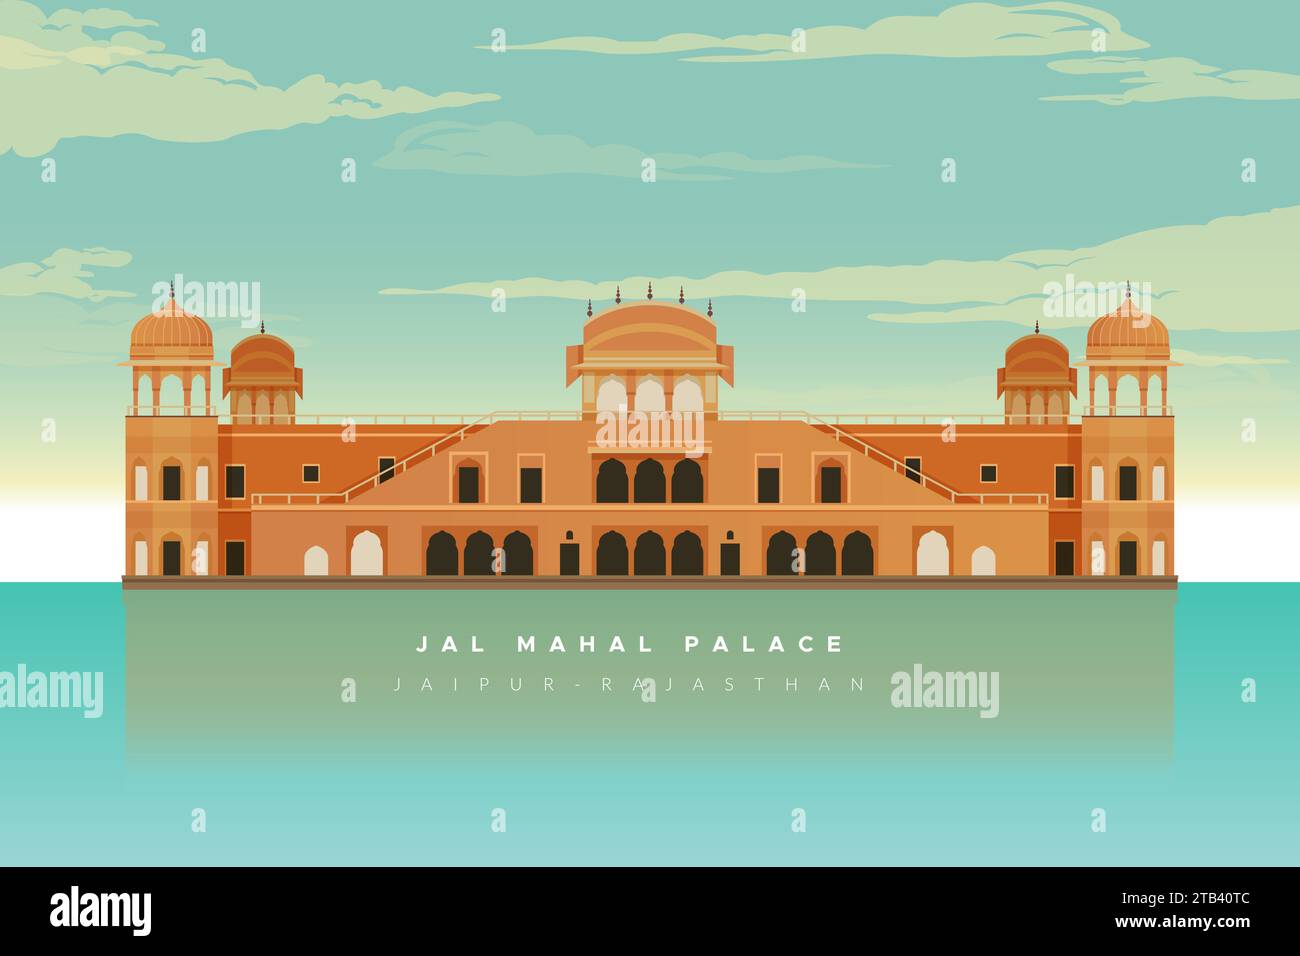 JAL Mahal Palace, Jaipur Rajasthan - Stock Illustration AS EPS 10 file Illustrazione Vettoriale